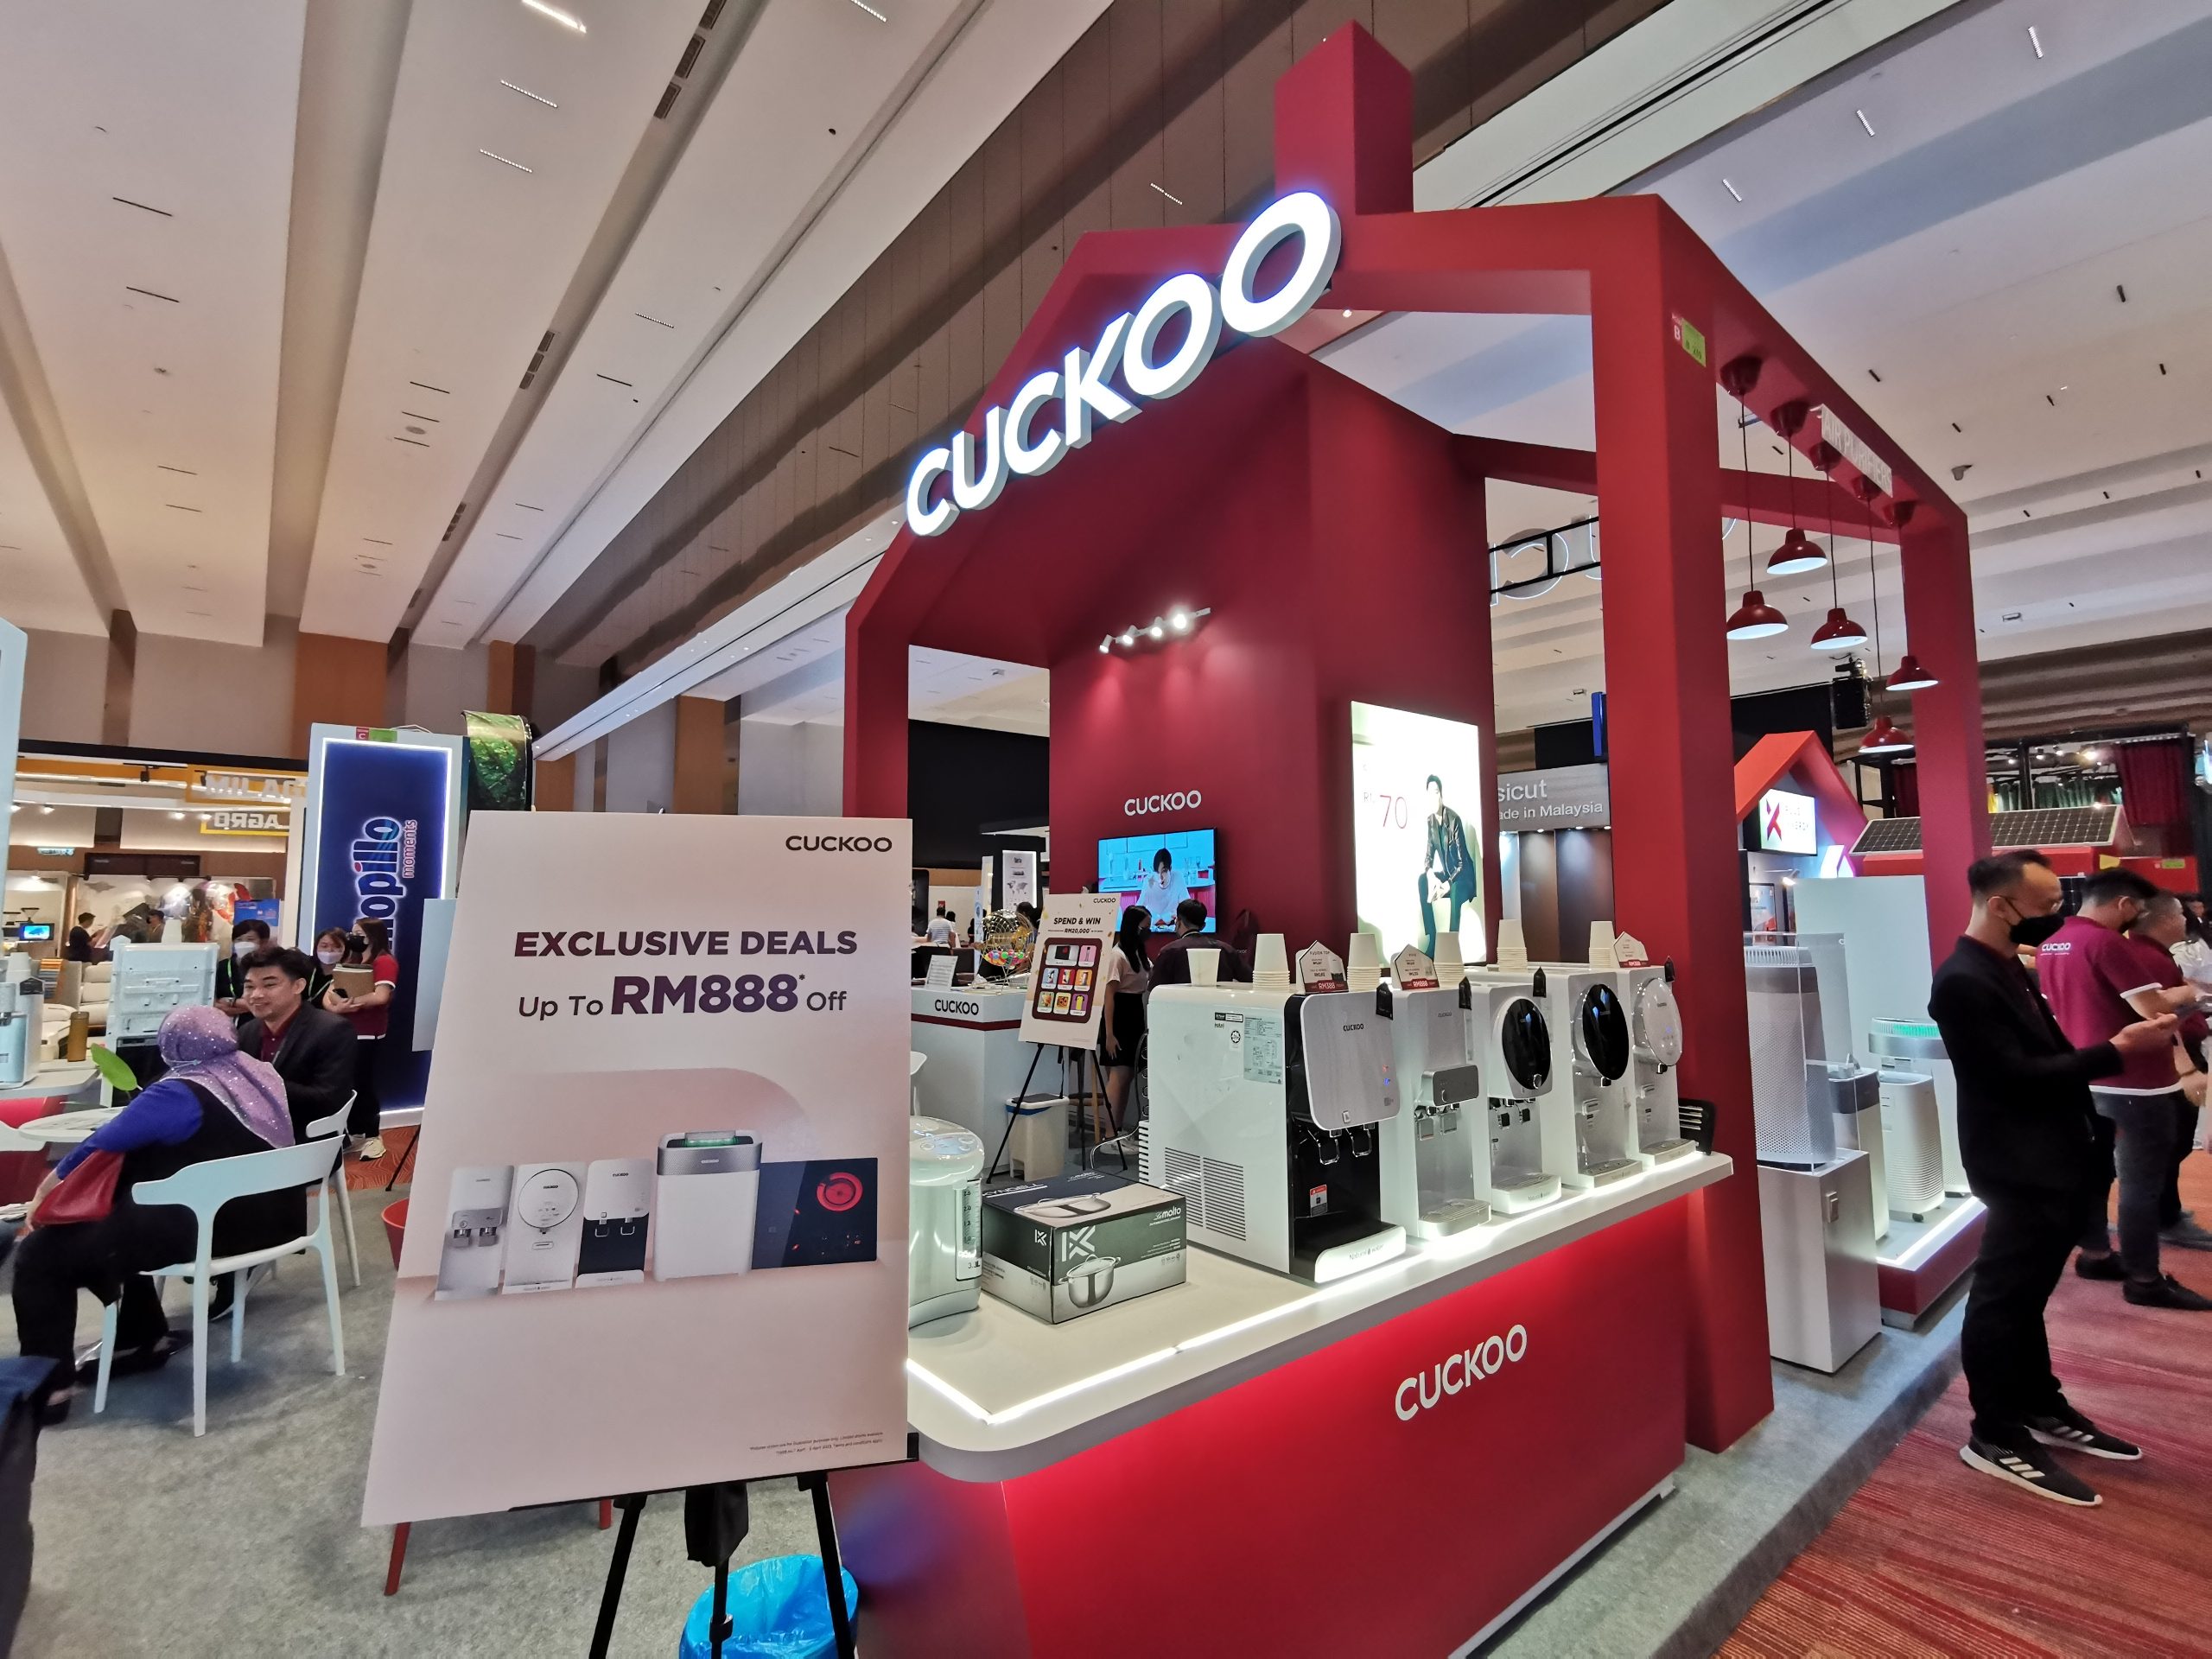 CUCKOO will display a variety of high-quality healthy home appliances and household products here, and also provide high-quality after-sales services.